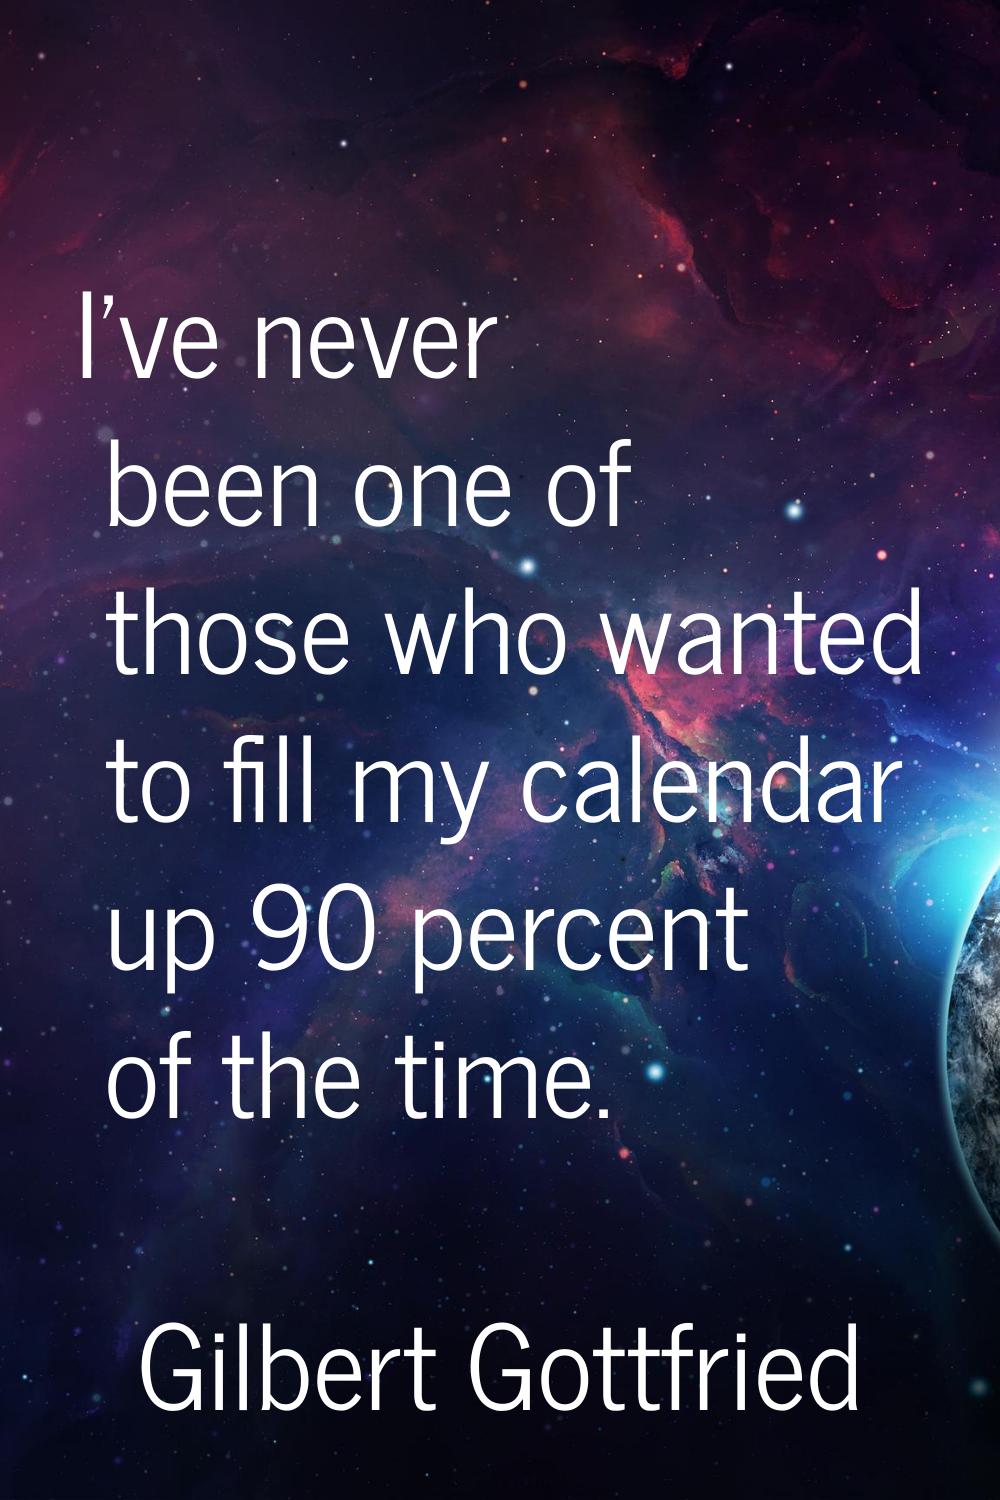 I've never been one of those who wanted to fill my calendar up 90 percent of the time.